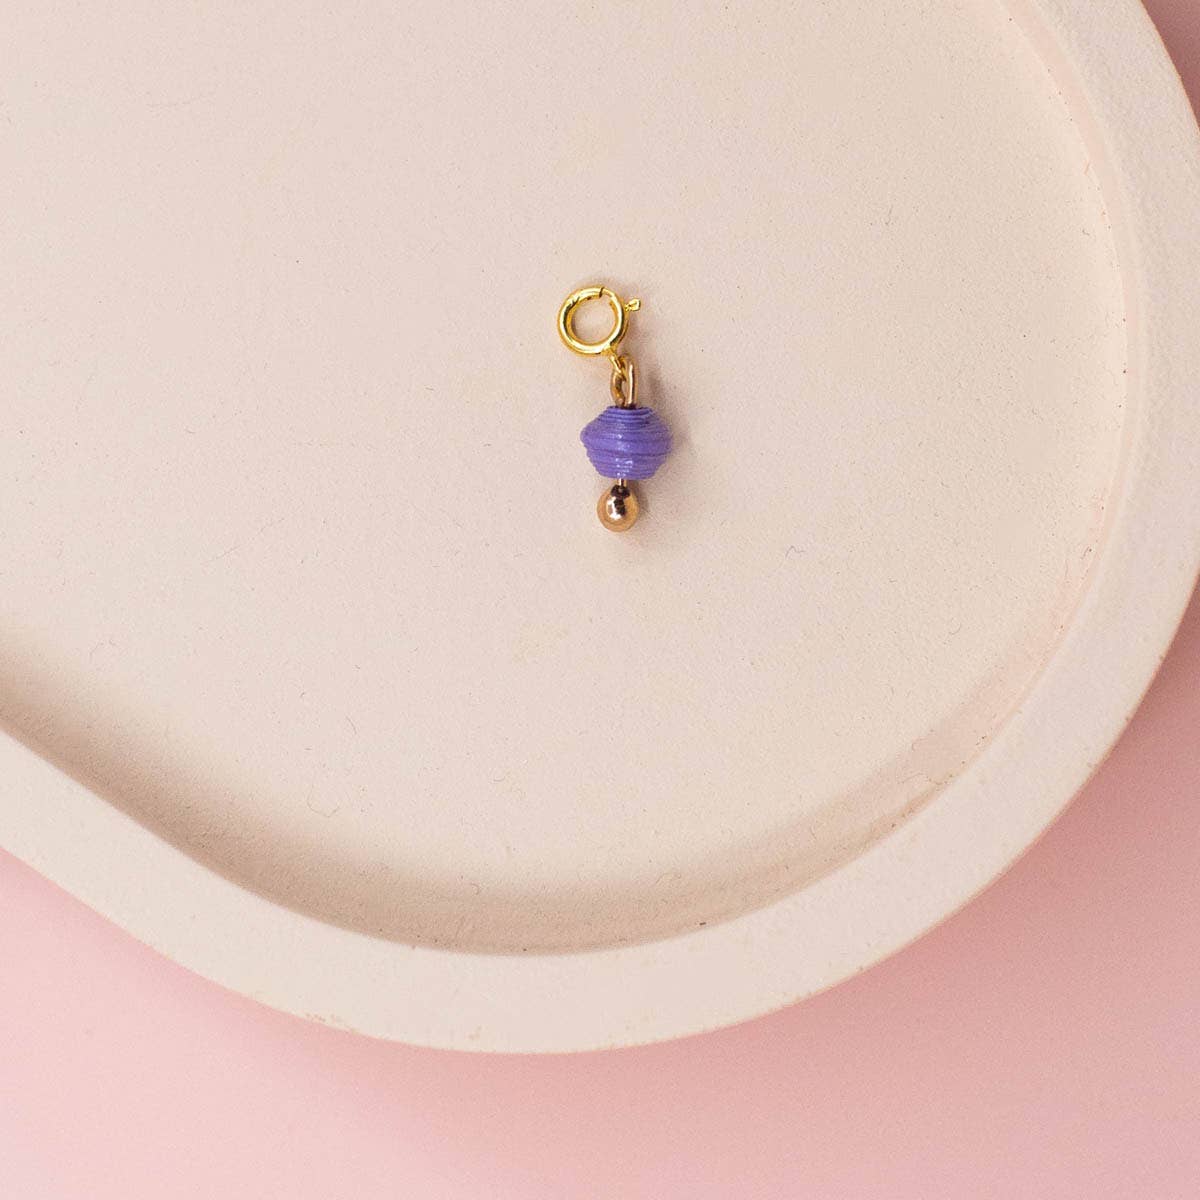 The Birthstone Beads - February Accessories Dreamer & CO   